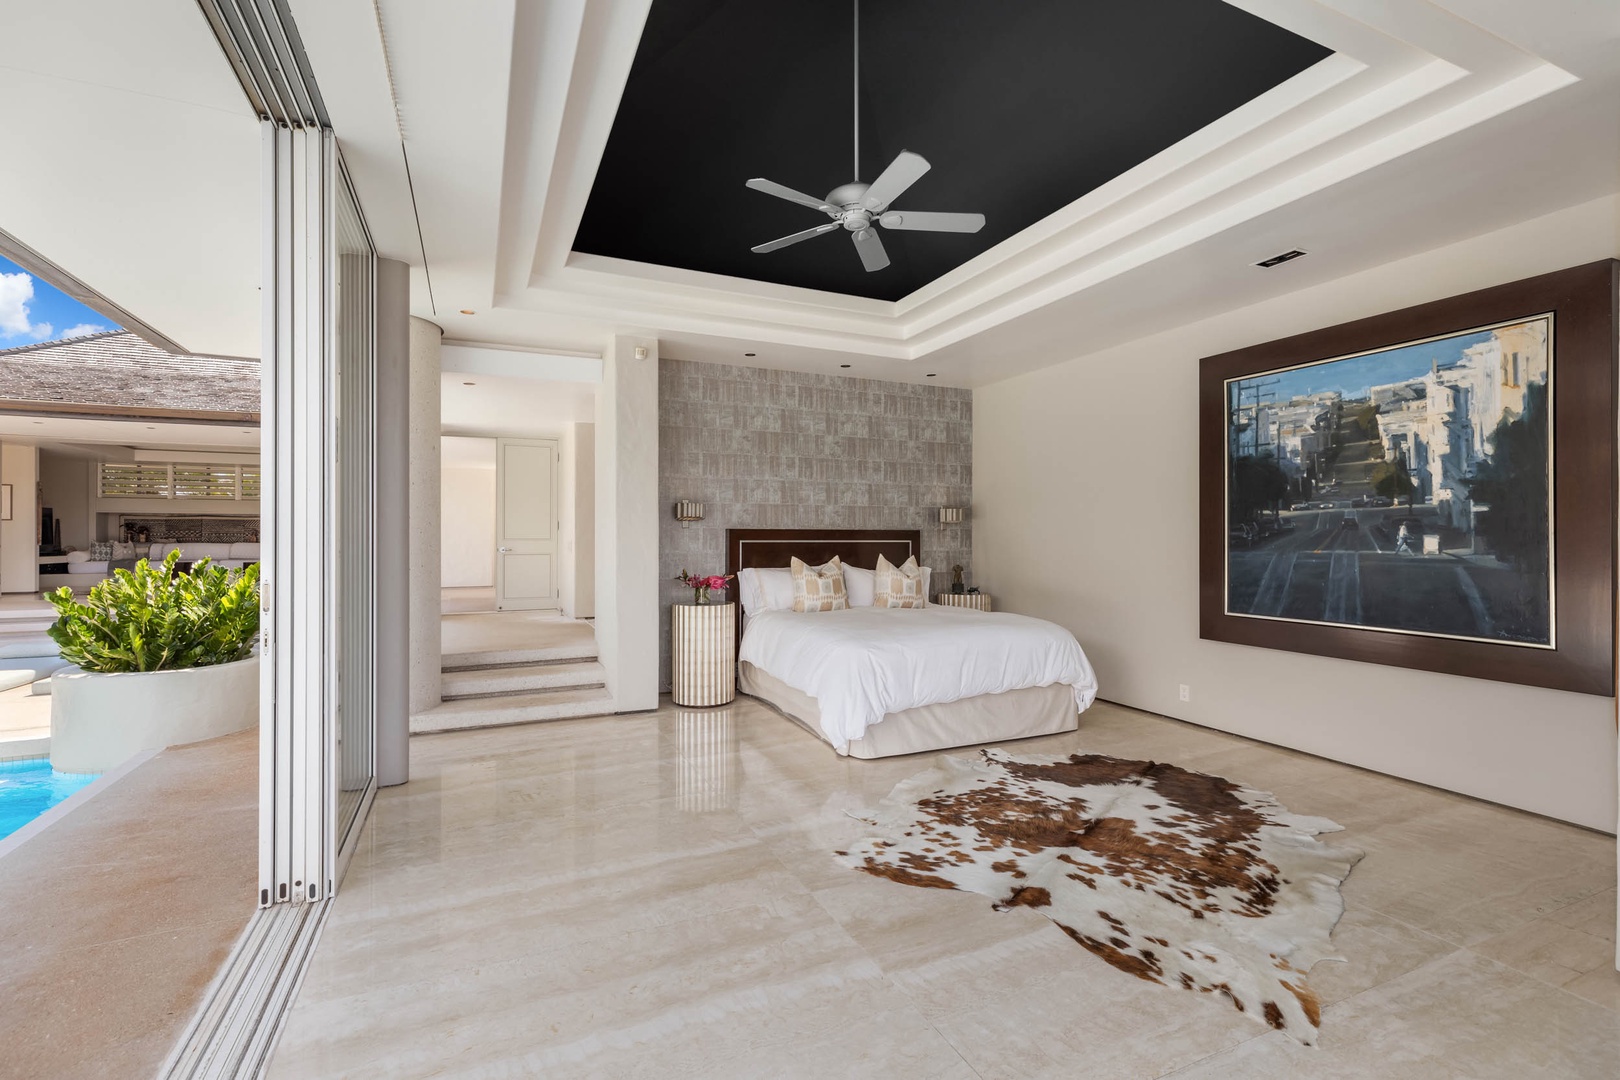 Honolulu Vacation Rentals, Sky Ridge House - The luxurious white bedding contrasts beautifully with a natural-toned cowhide rug, setting the tone for opulent relaxation.